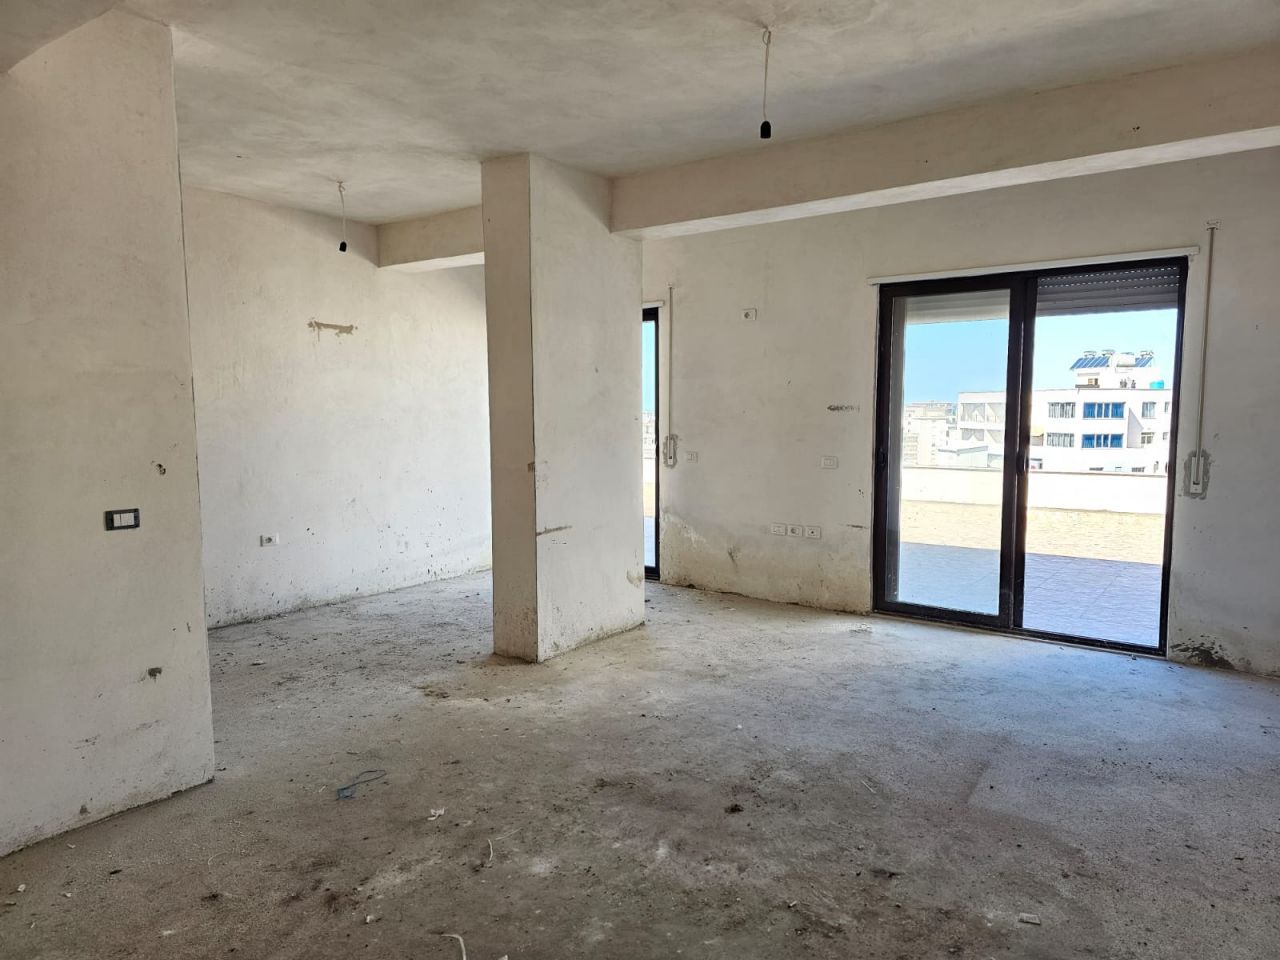 Penthouse For Sale In Vlora Albania, Located In A Good Area Near The Beach